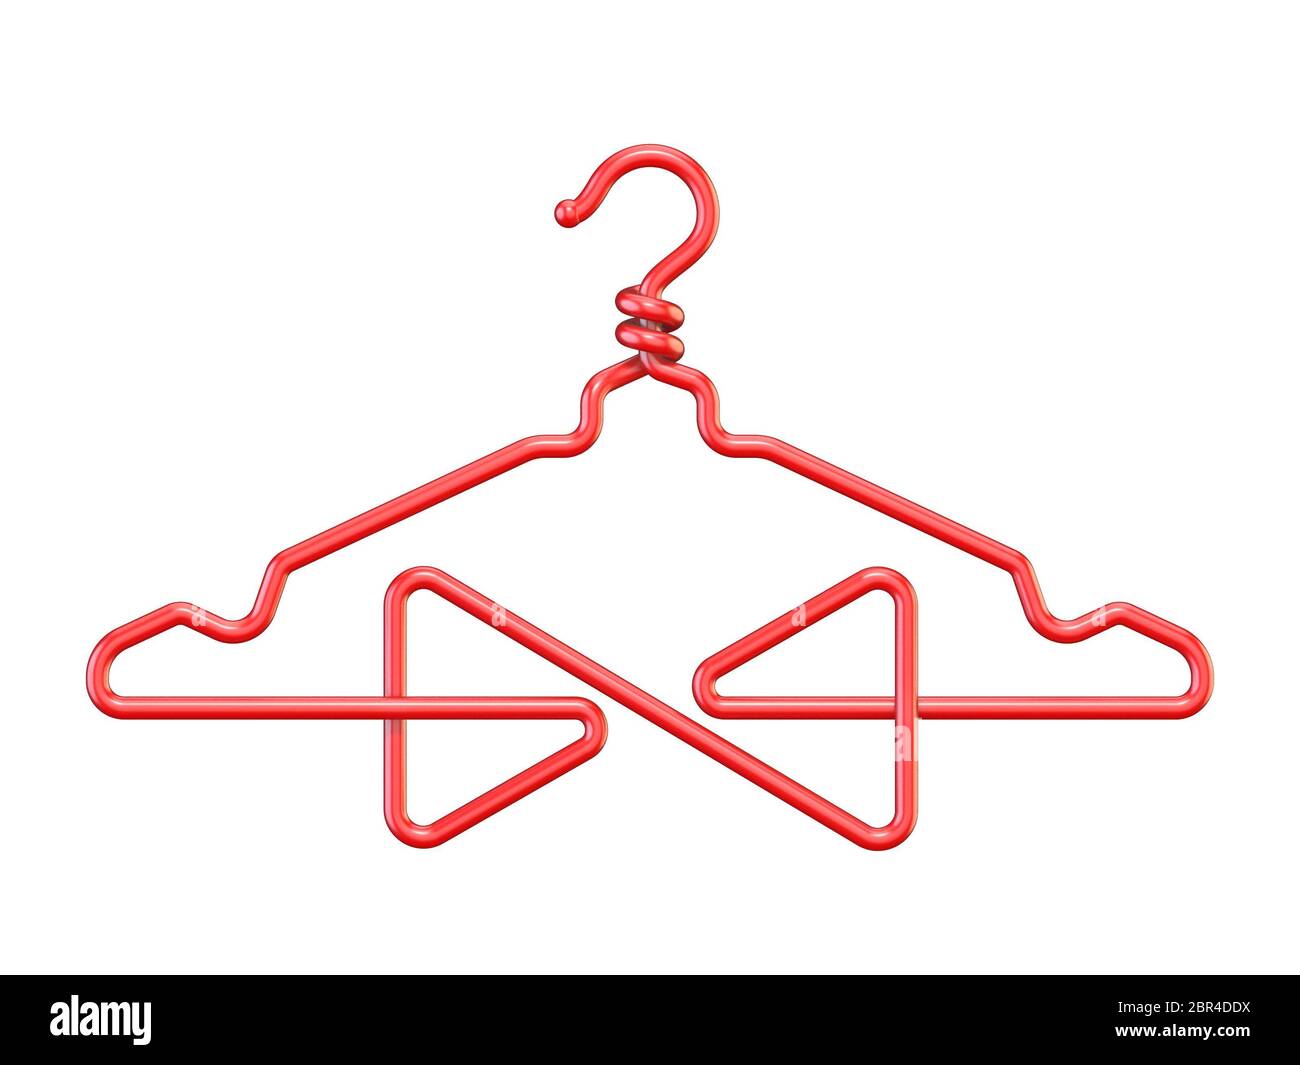 Red wire coat hanger bow tie 3D render illustration isolated on white background Stock Photo